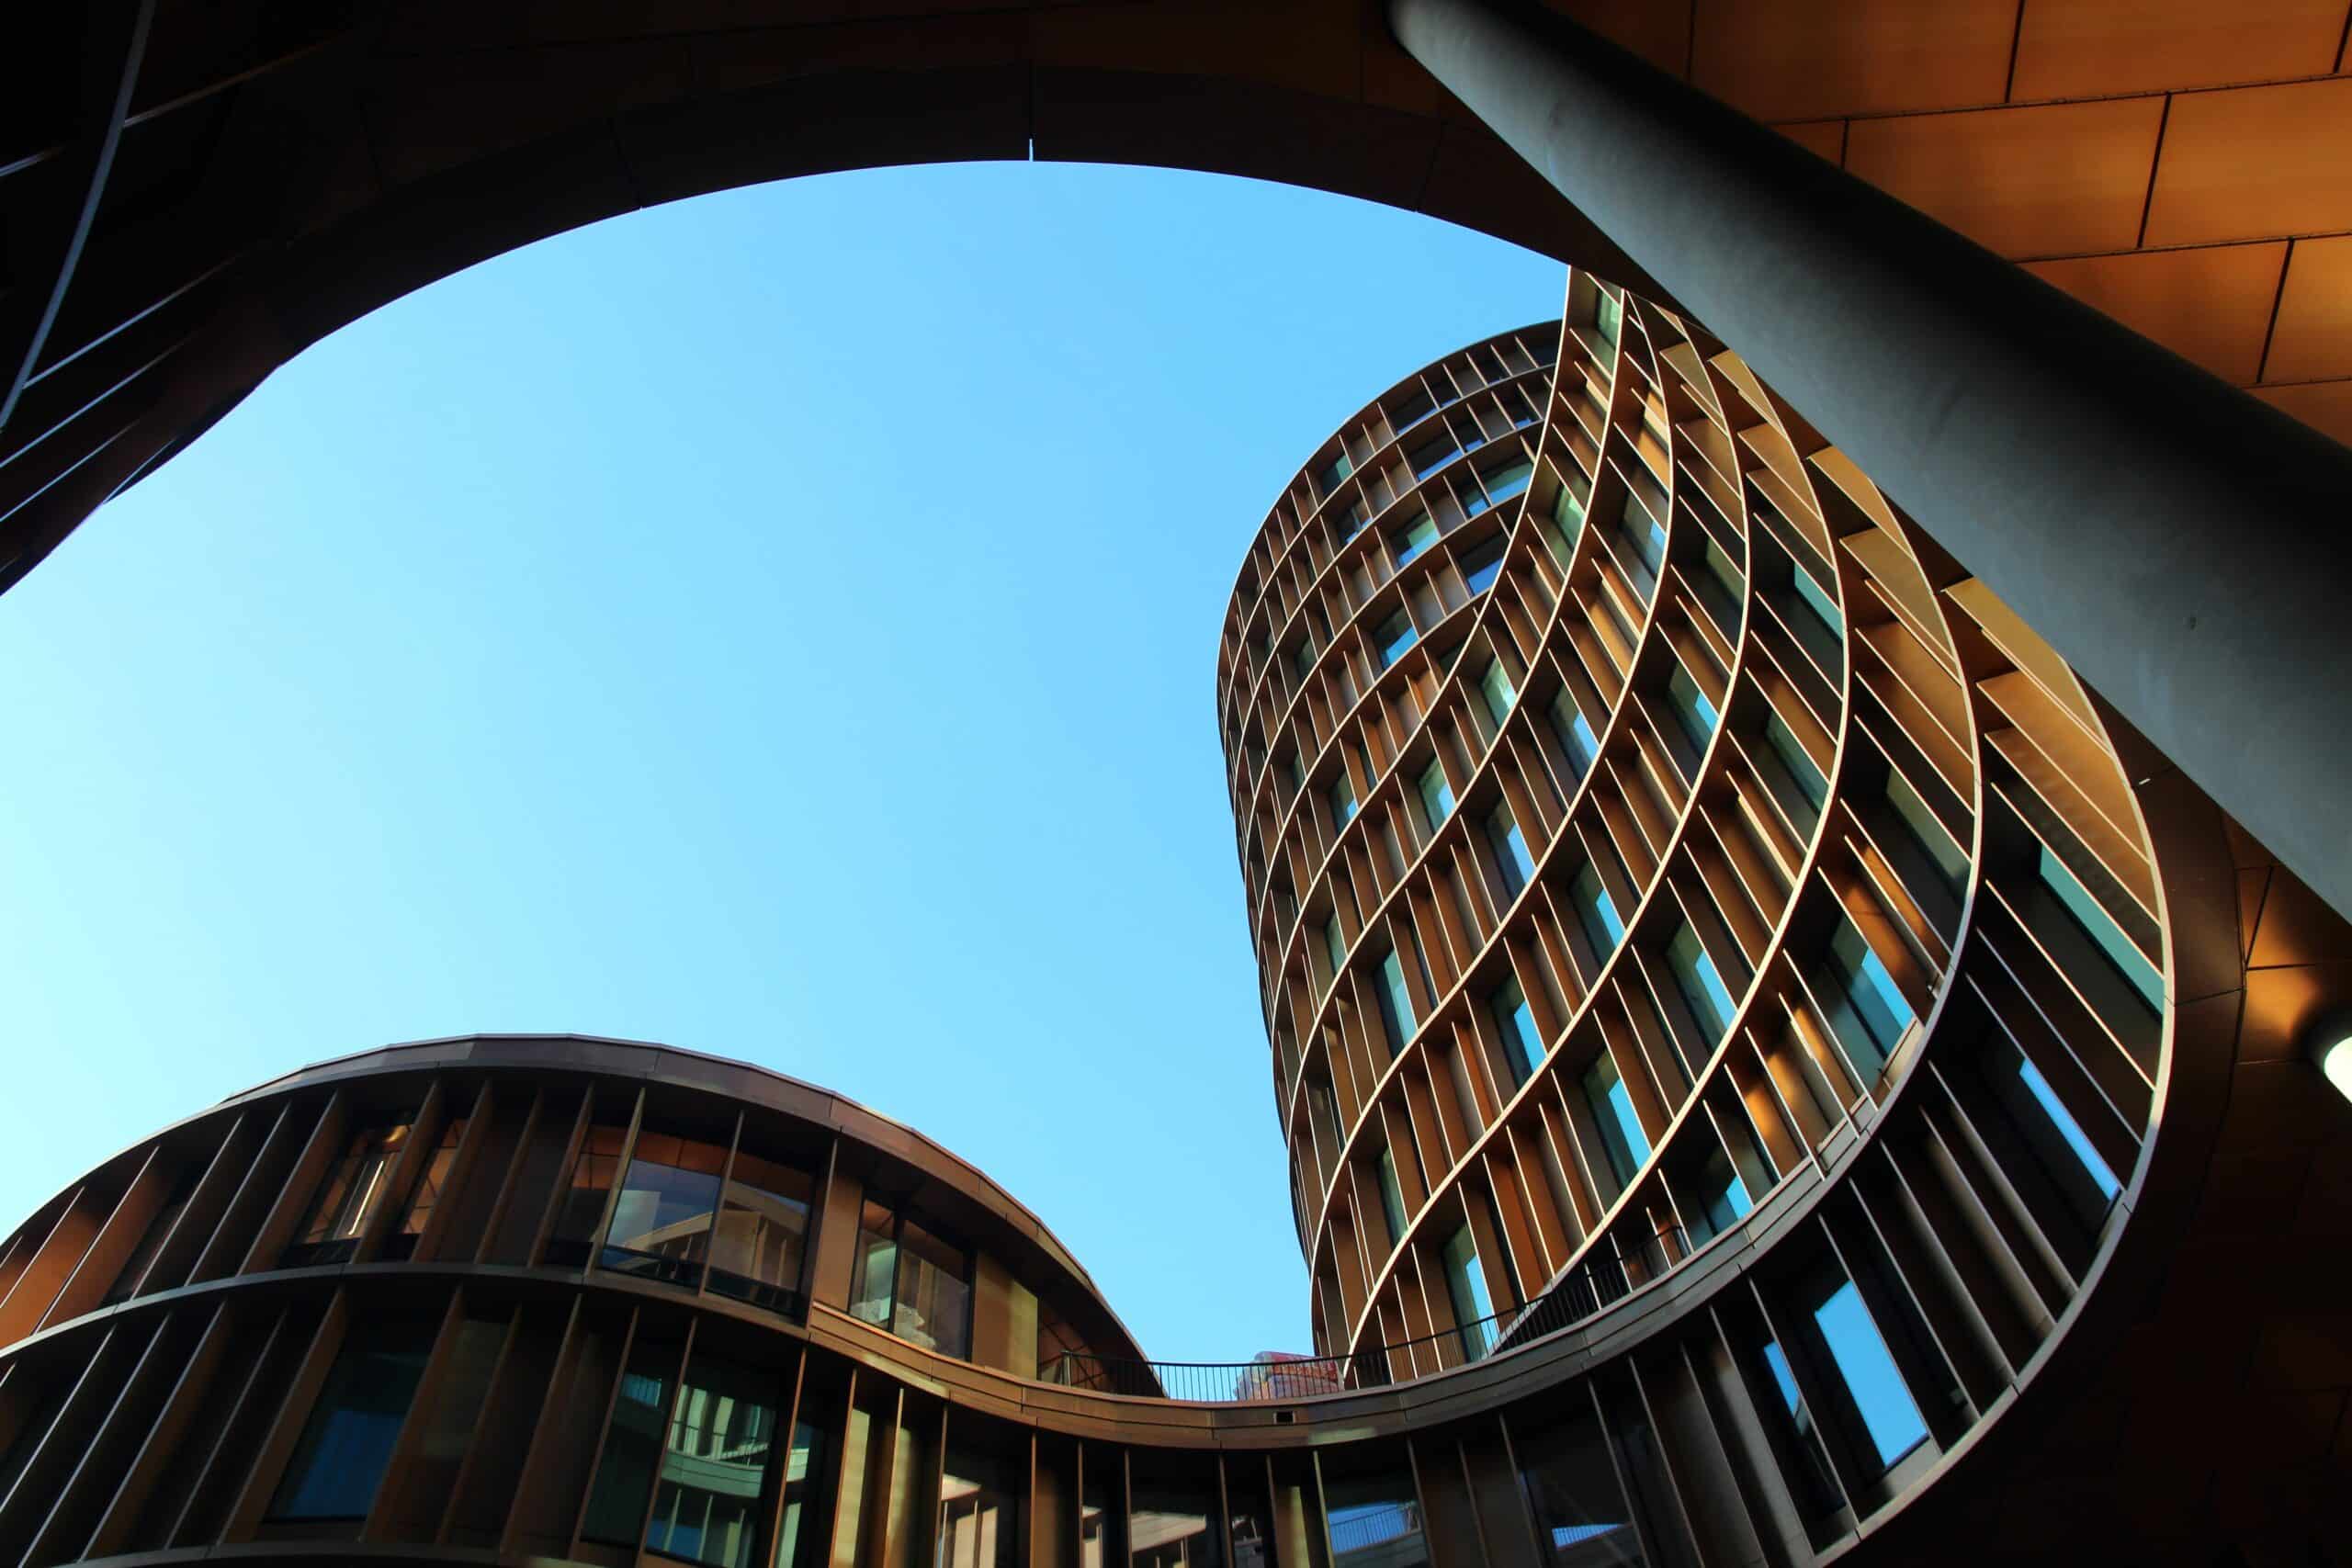 shot from the ground looking up to some round / curved modern buildings with big windows